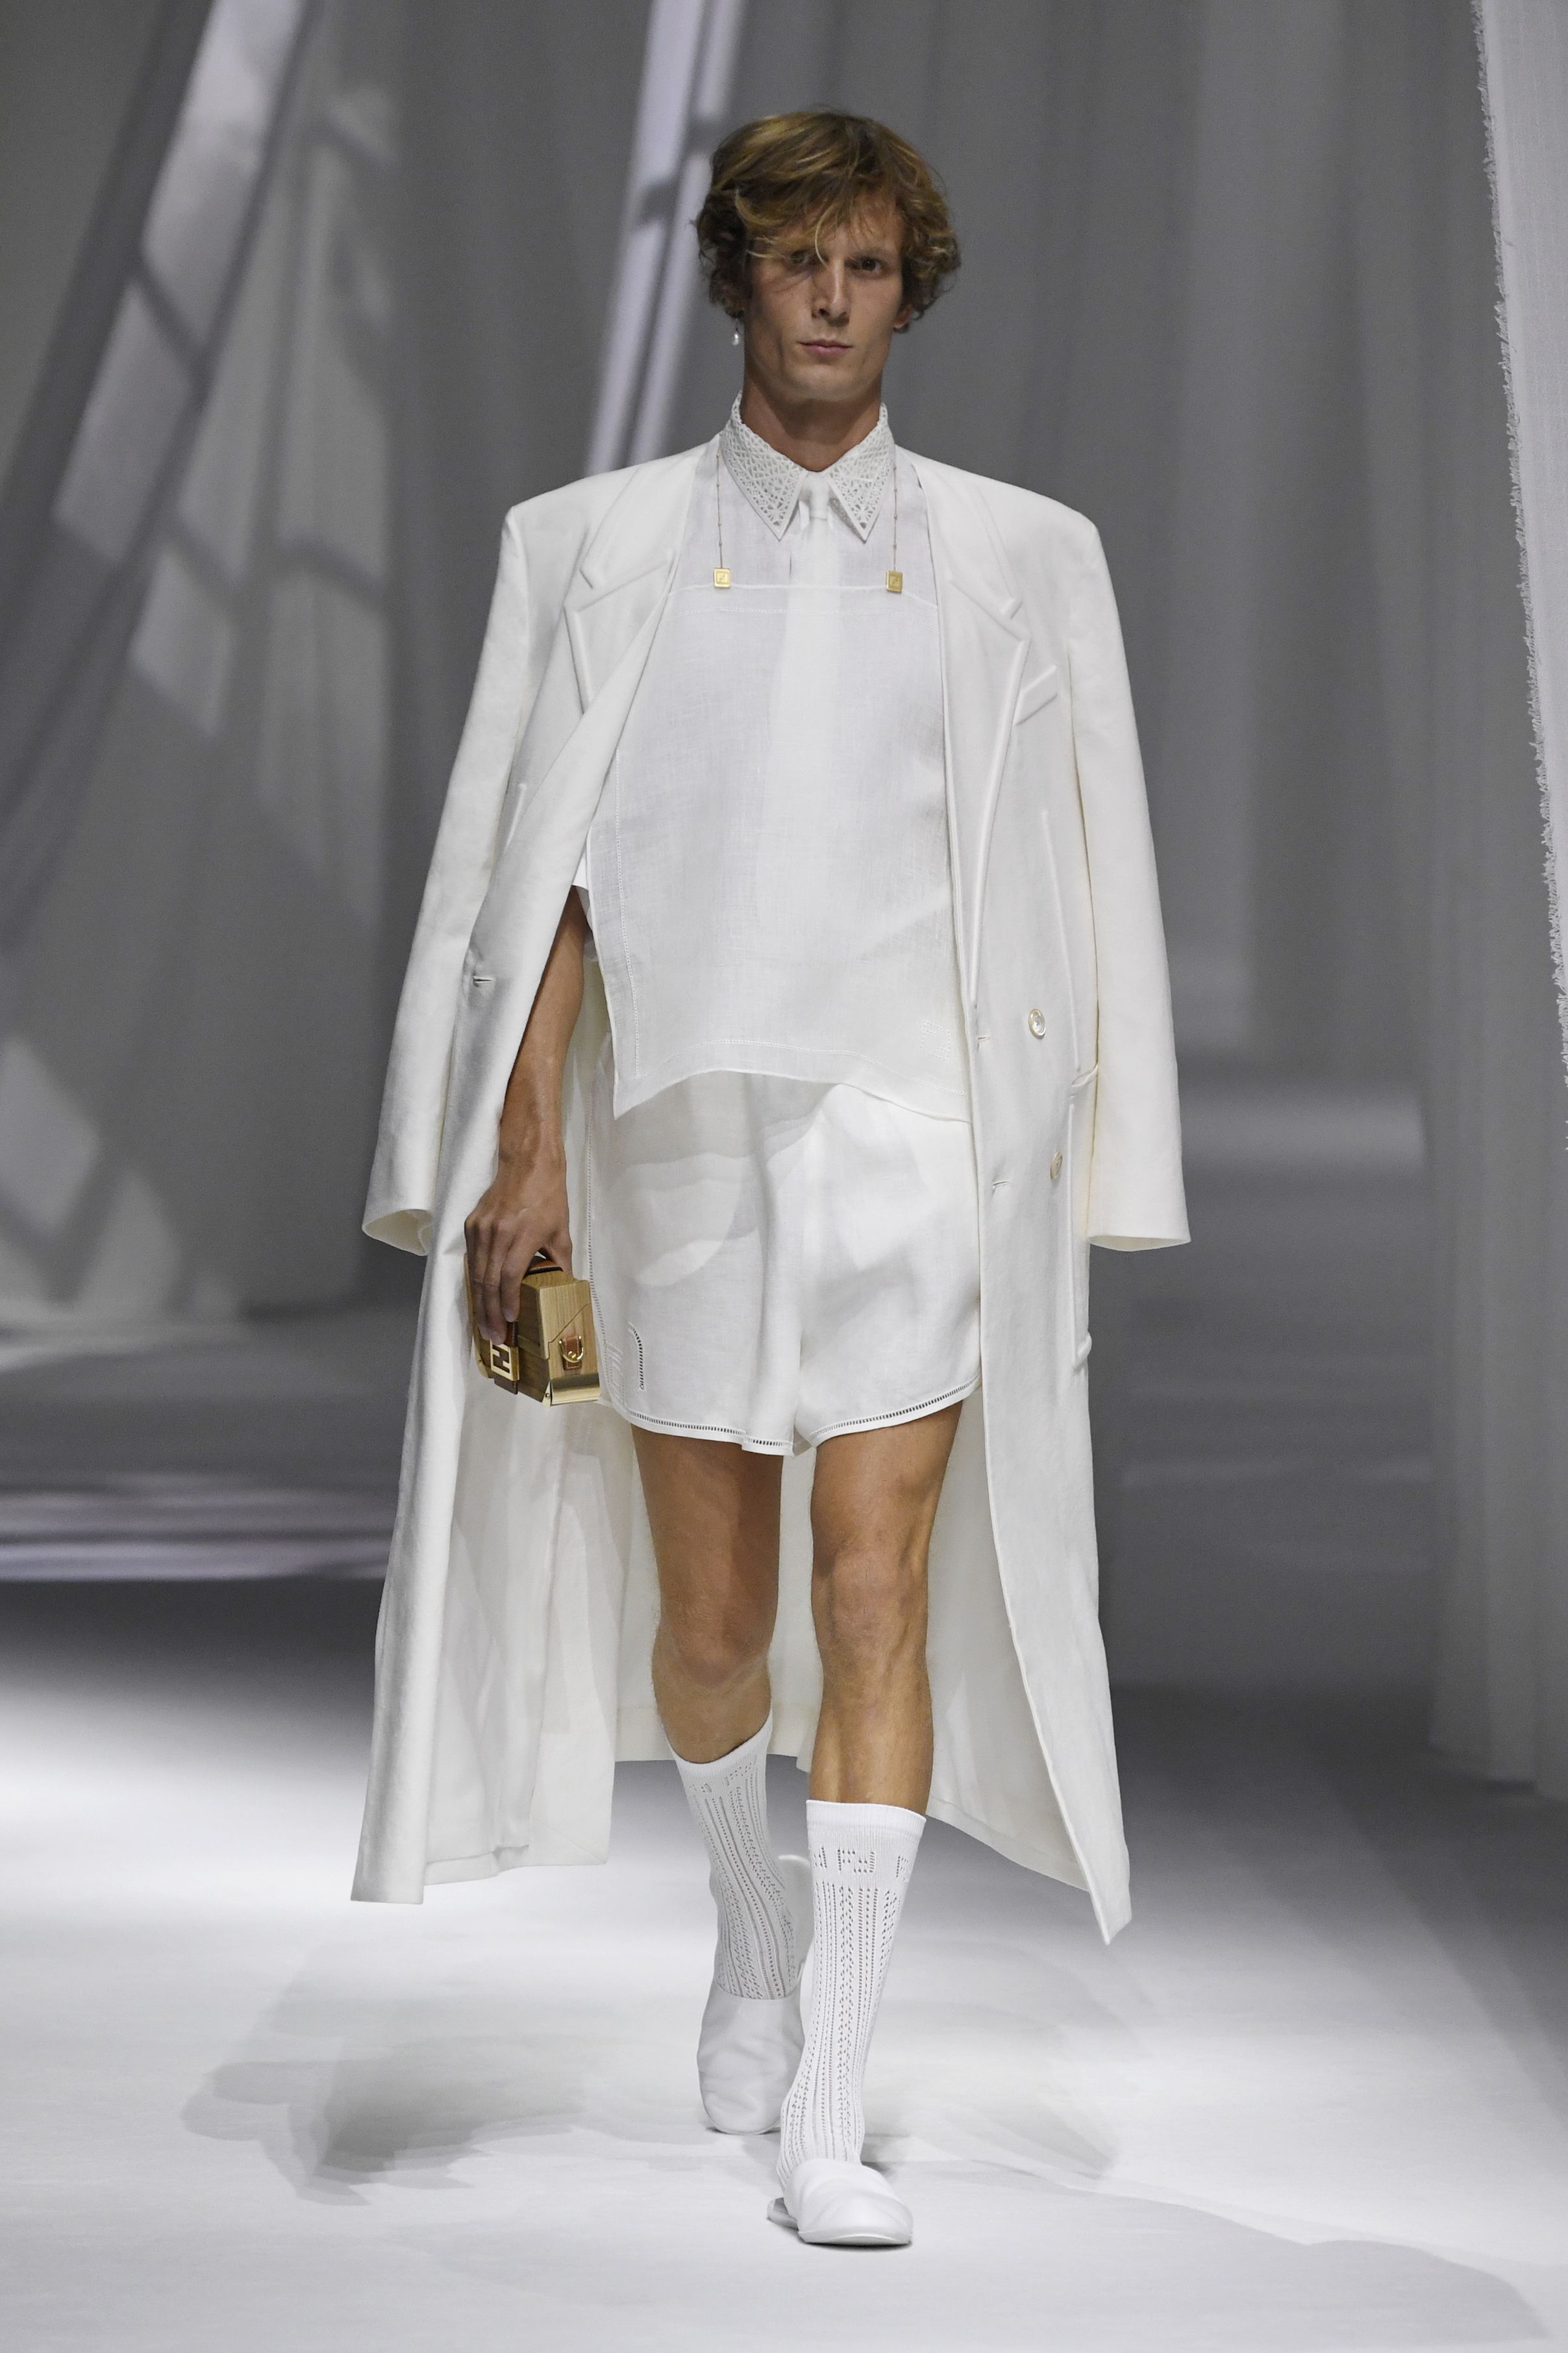 FENDI Women's and Men's Spring/Summer 2021 Collections - Fashion Trendsetter